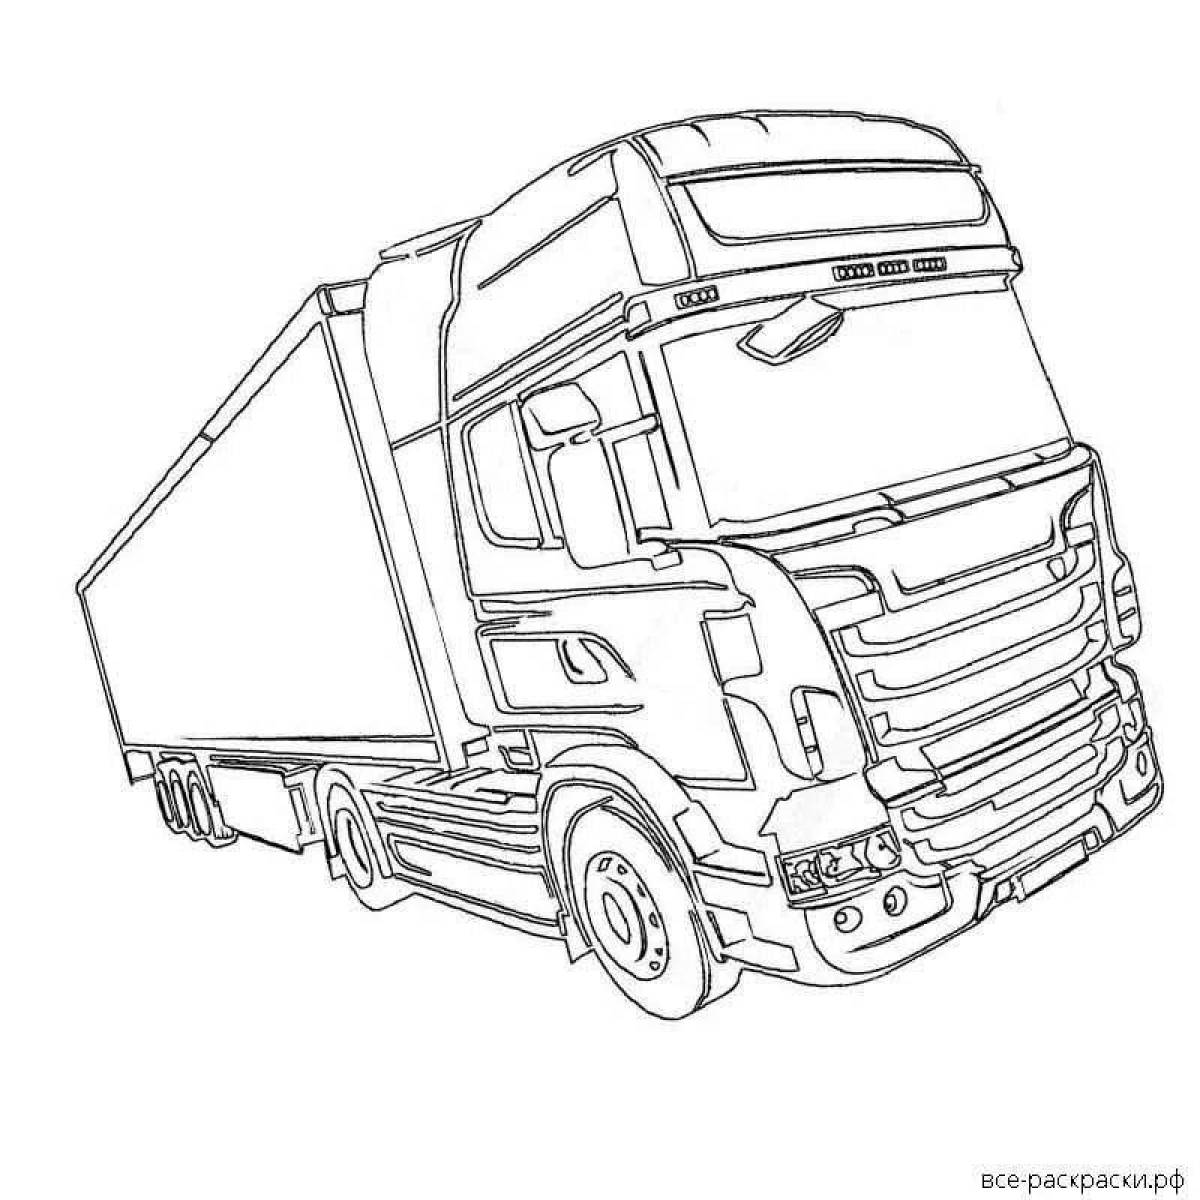 Bold volvo truck coloring page